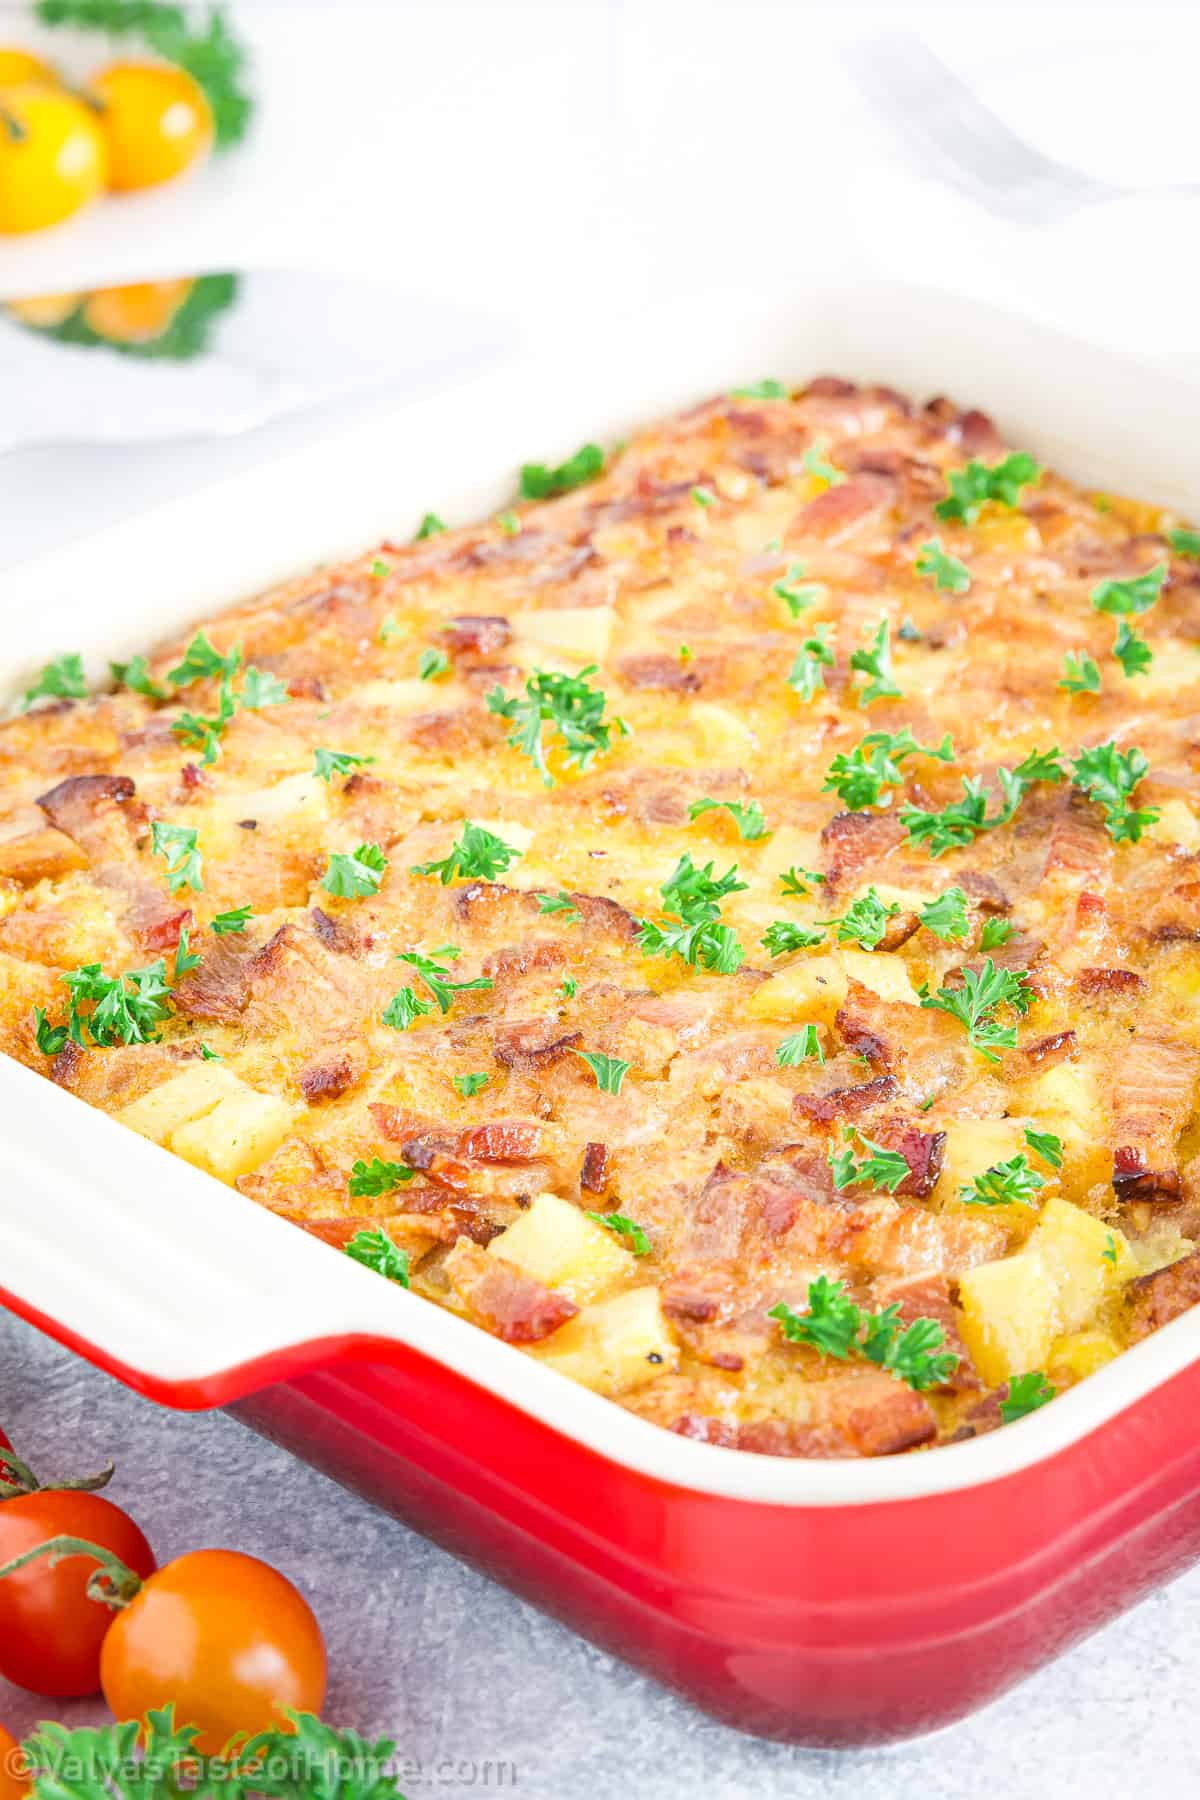 The bacon gets fried up crispy, the potatoes get sautéed just right, and the egg mixture gets poured over everything before the whole dish bakes up. 